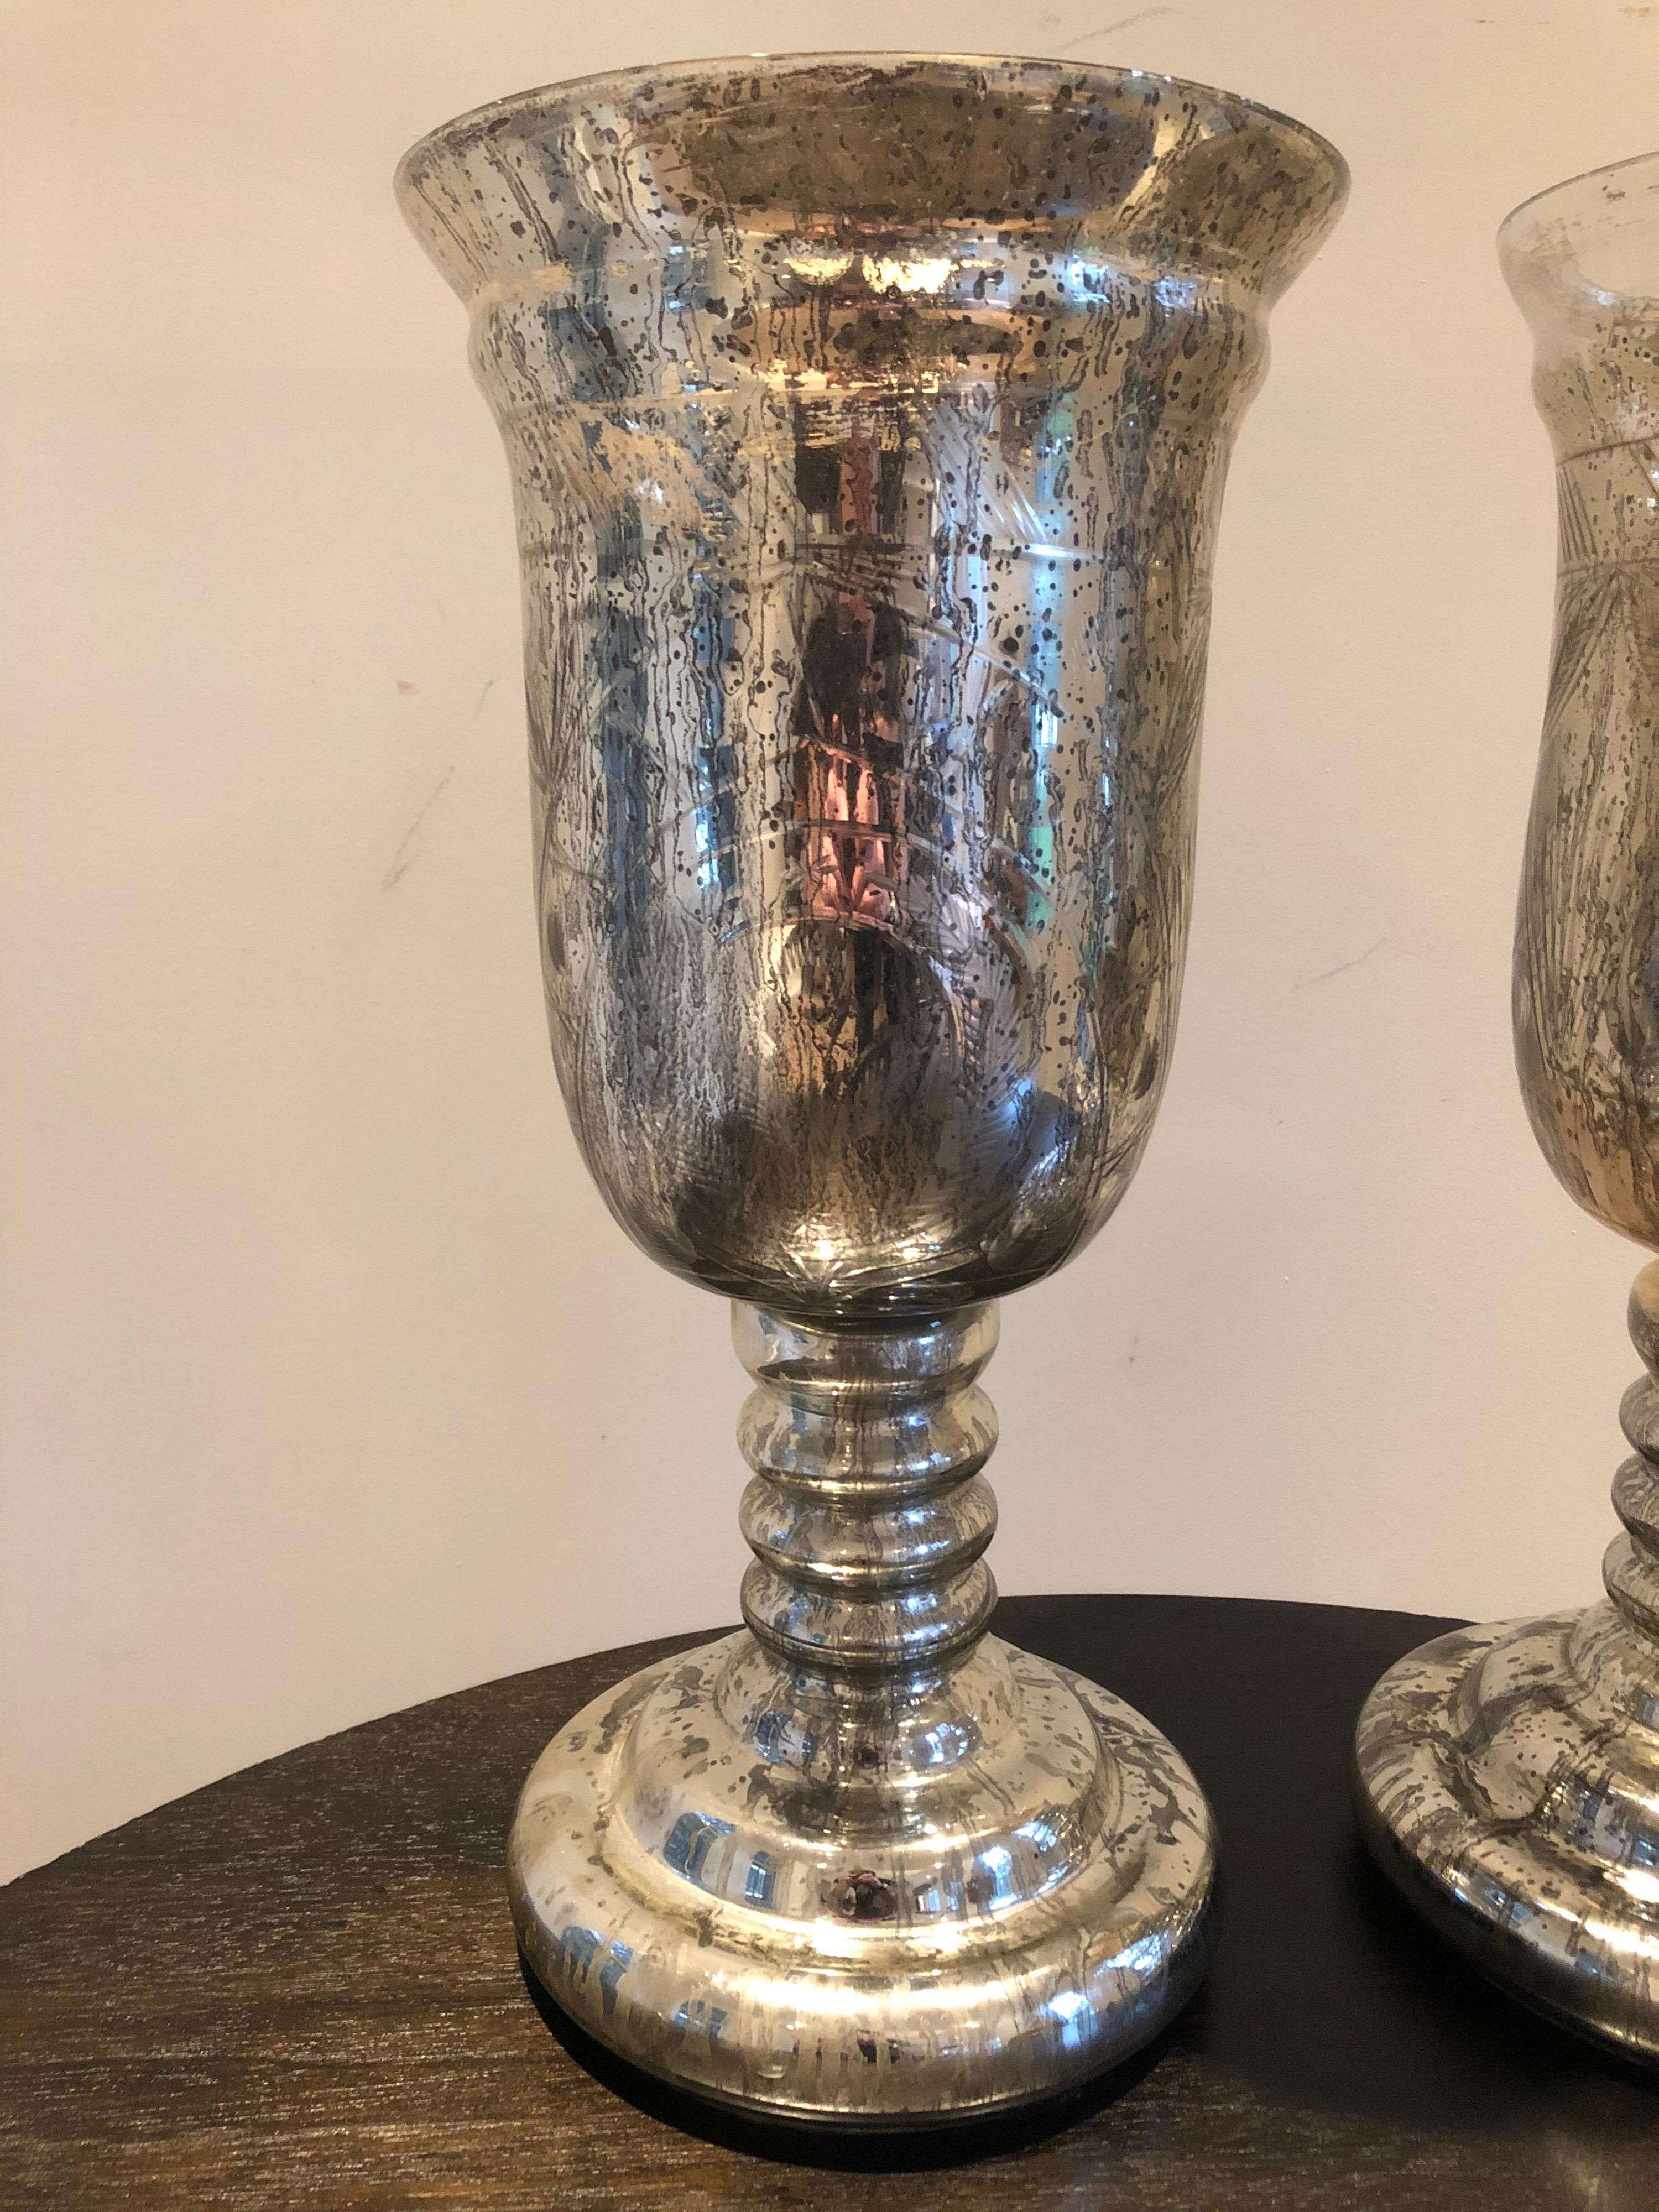 Large pair of antique mercury glass hurricanes or vases. Rare size, hand etched design and great patina. One is slightly larger because of the handmade quality of the piece.